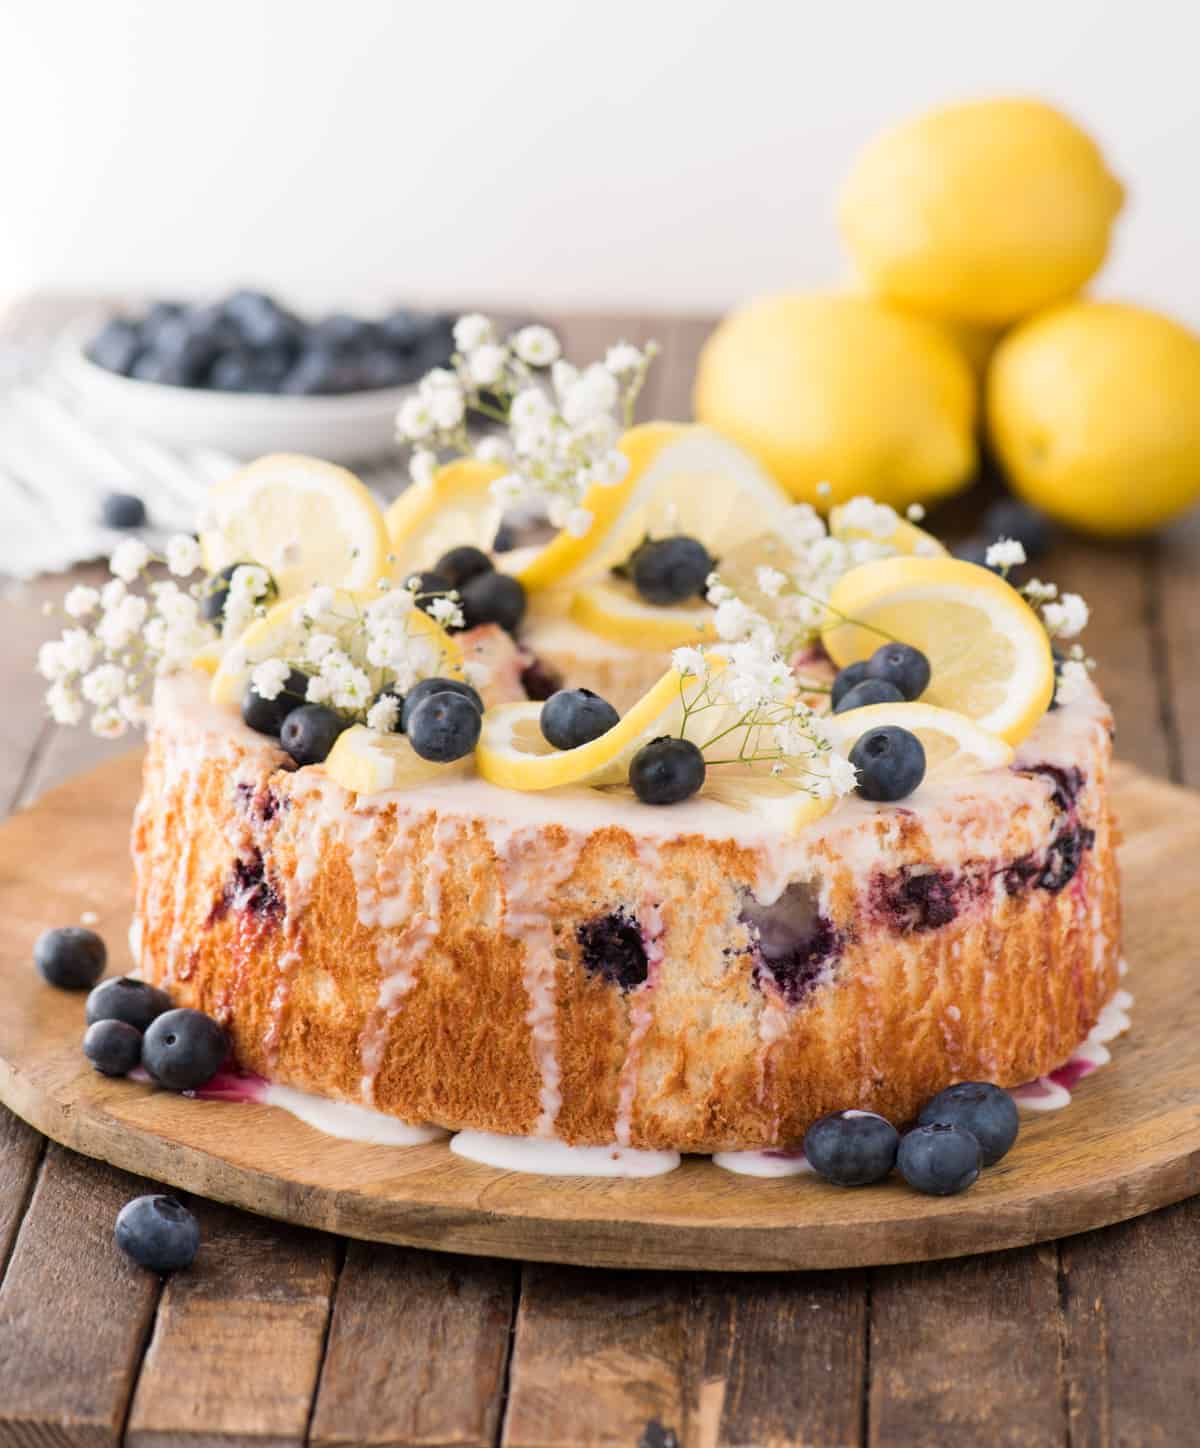 Lemon blueberry angel food cake with lemon slices, blueberries and baby’s breath as garnish on top of the cake on a wood serving plate. 